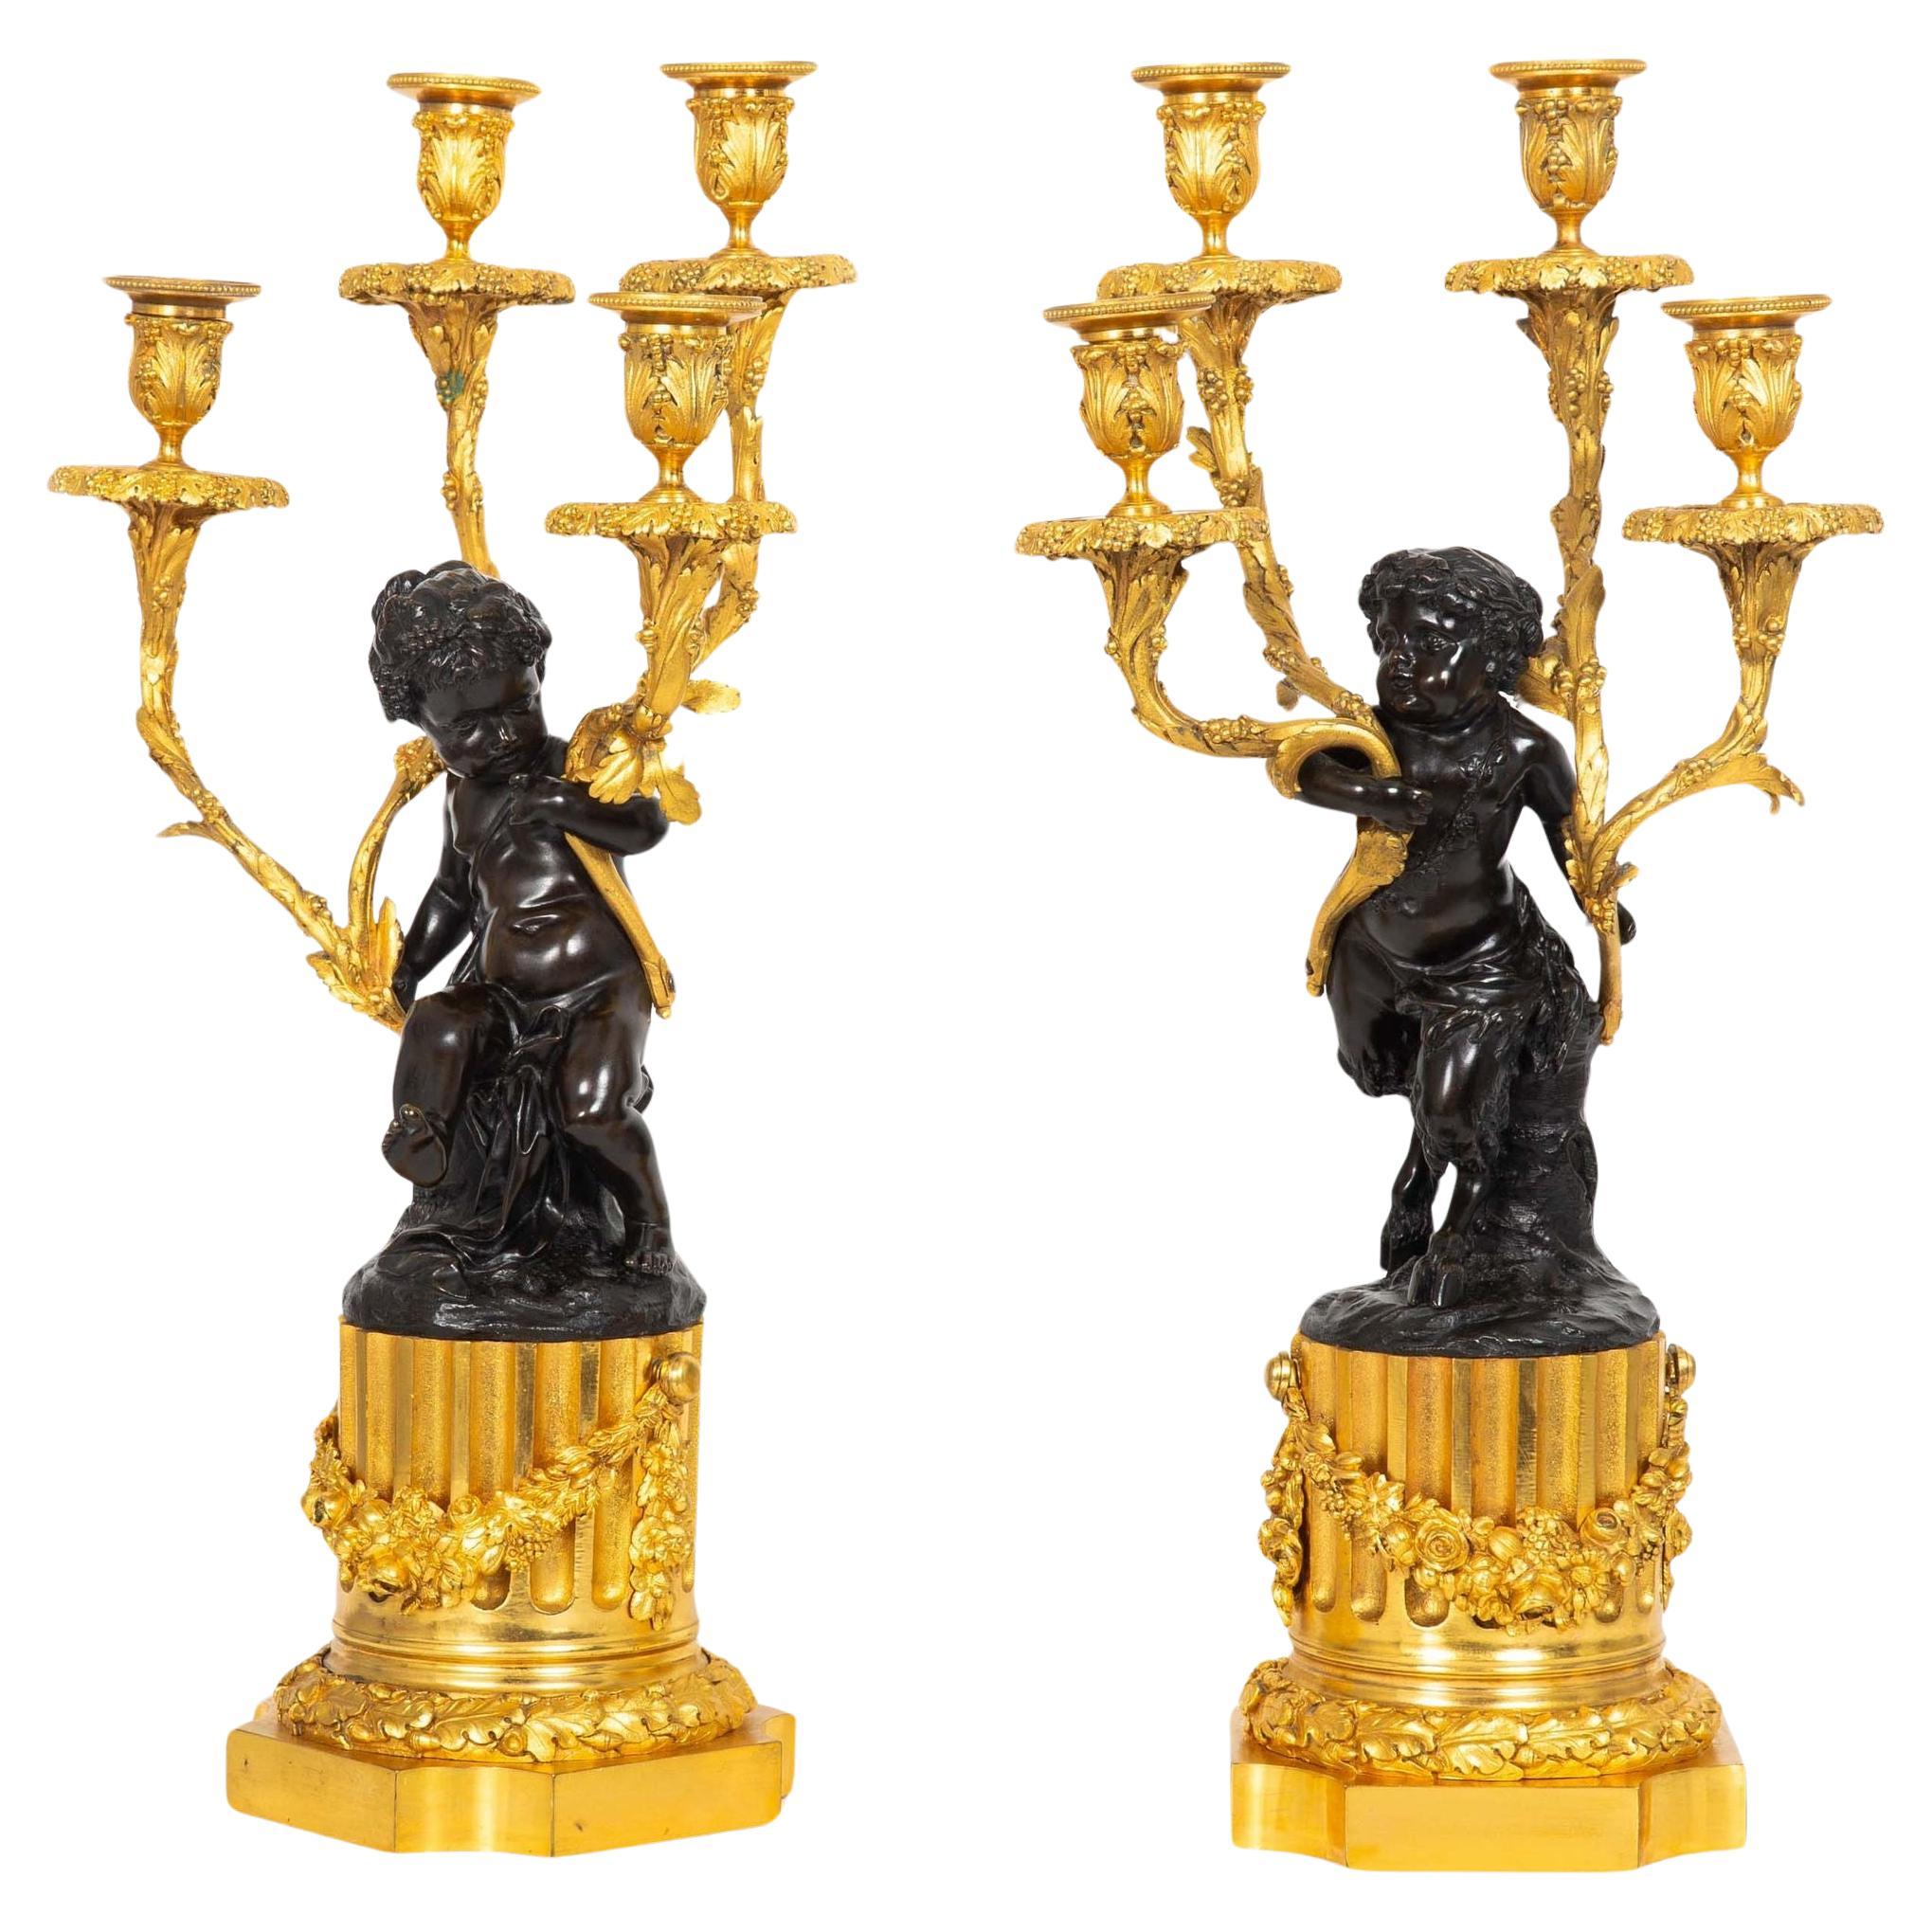 Pair of French Antique Four-Light "Satyr & Bacchante" Candelabra after Clodion